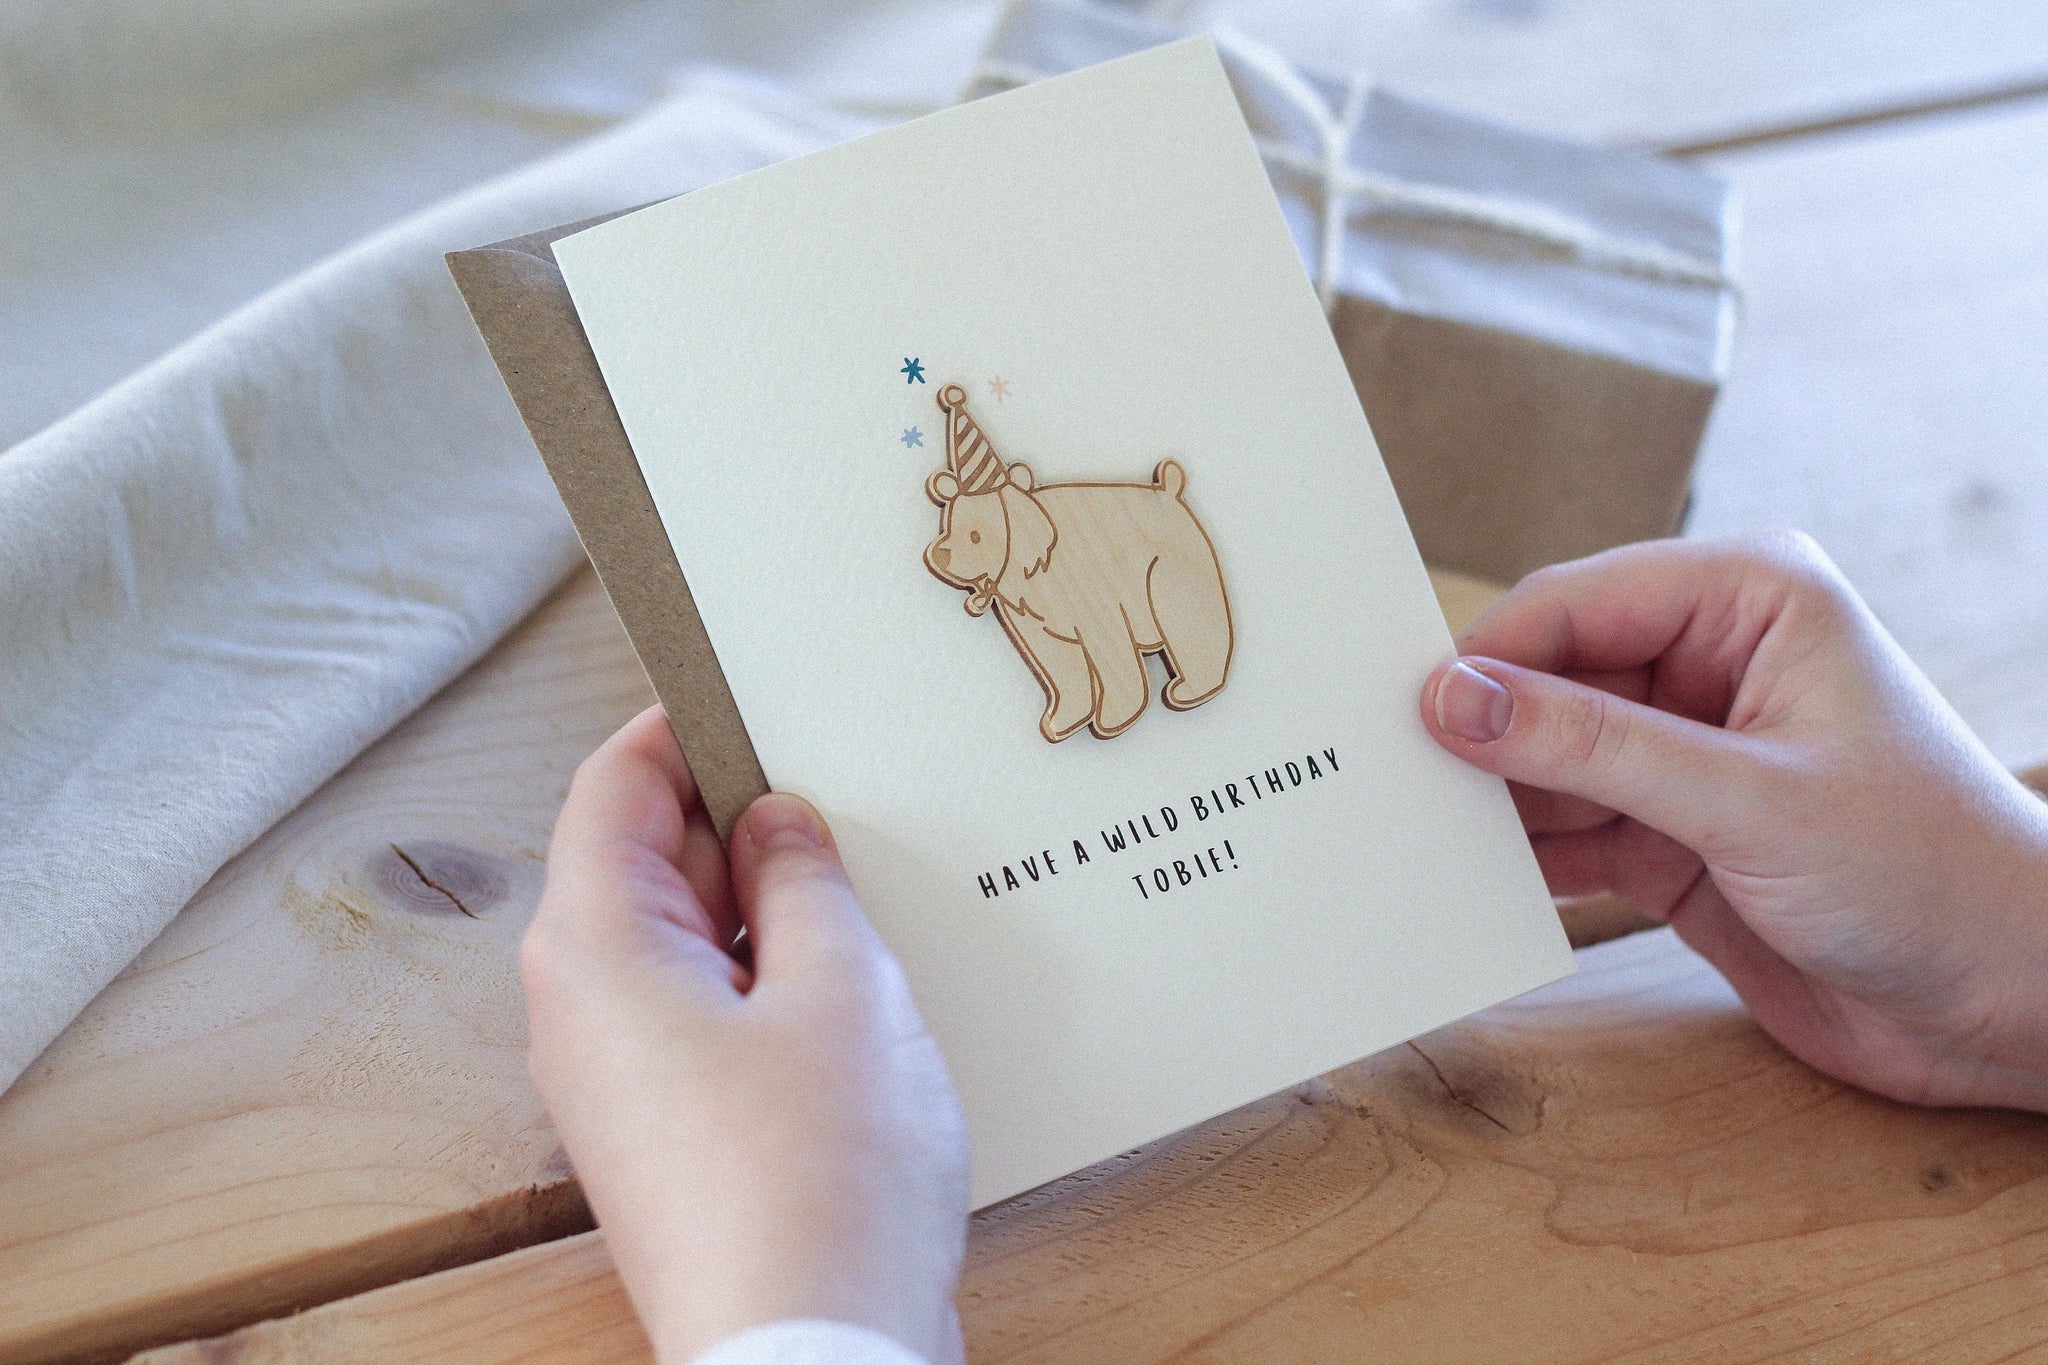 Personalised Bear Birthday Card | Celebration Card | Wooden Card